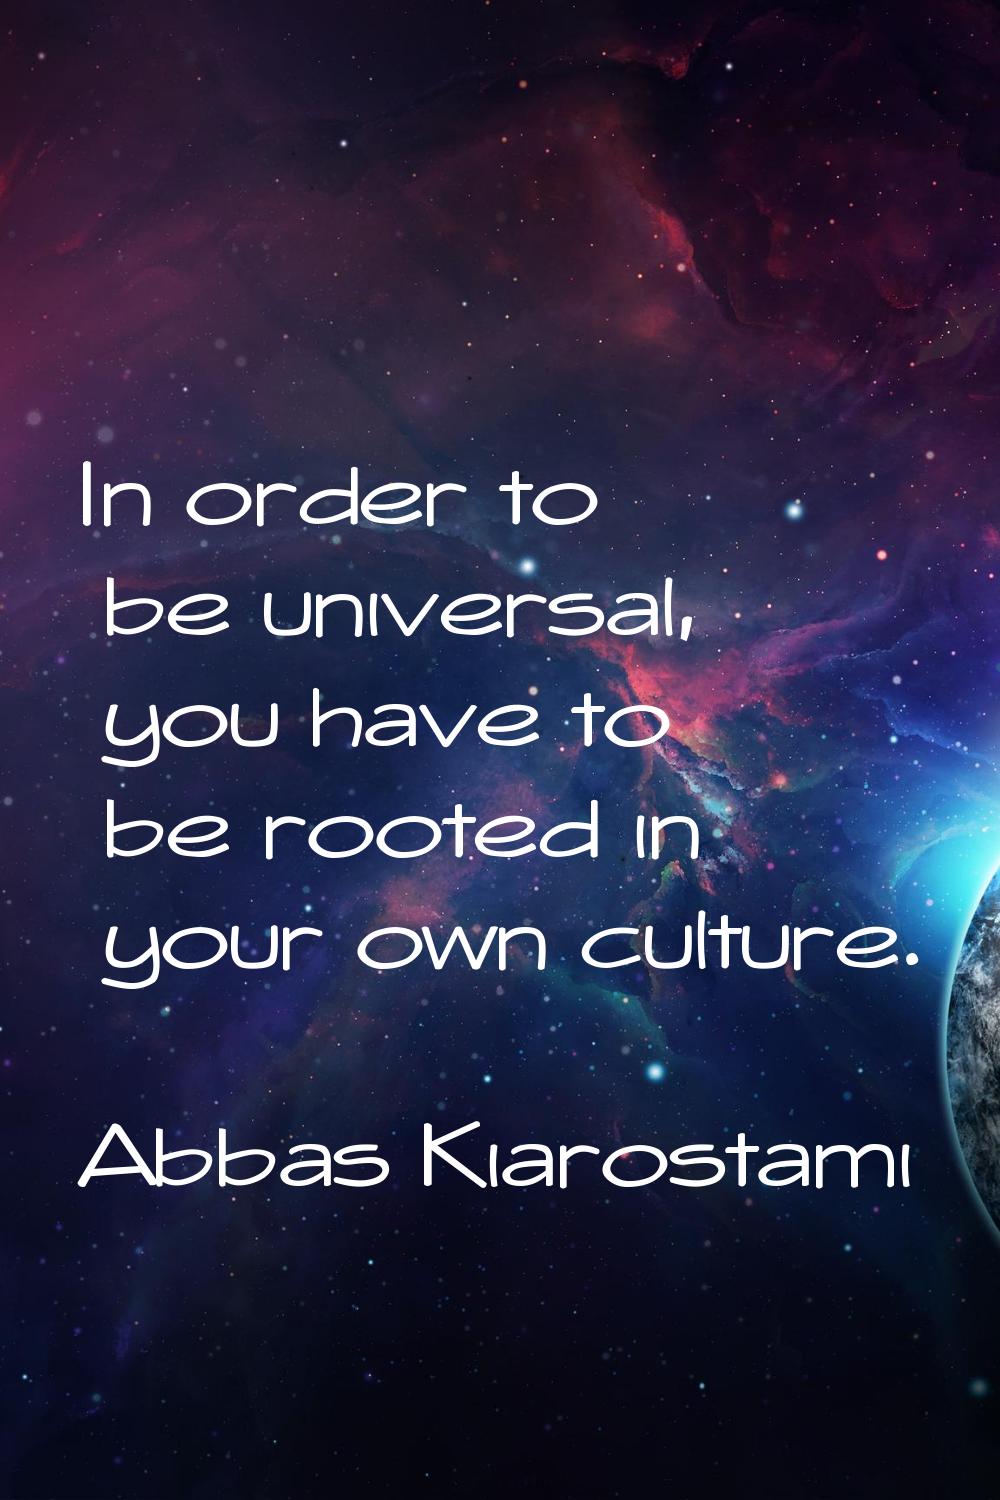 In order to be universal, you have to be rooted in your own culture.